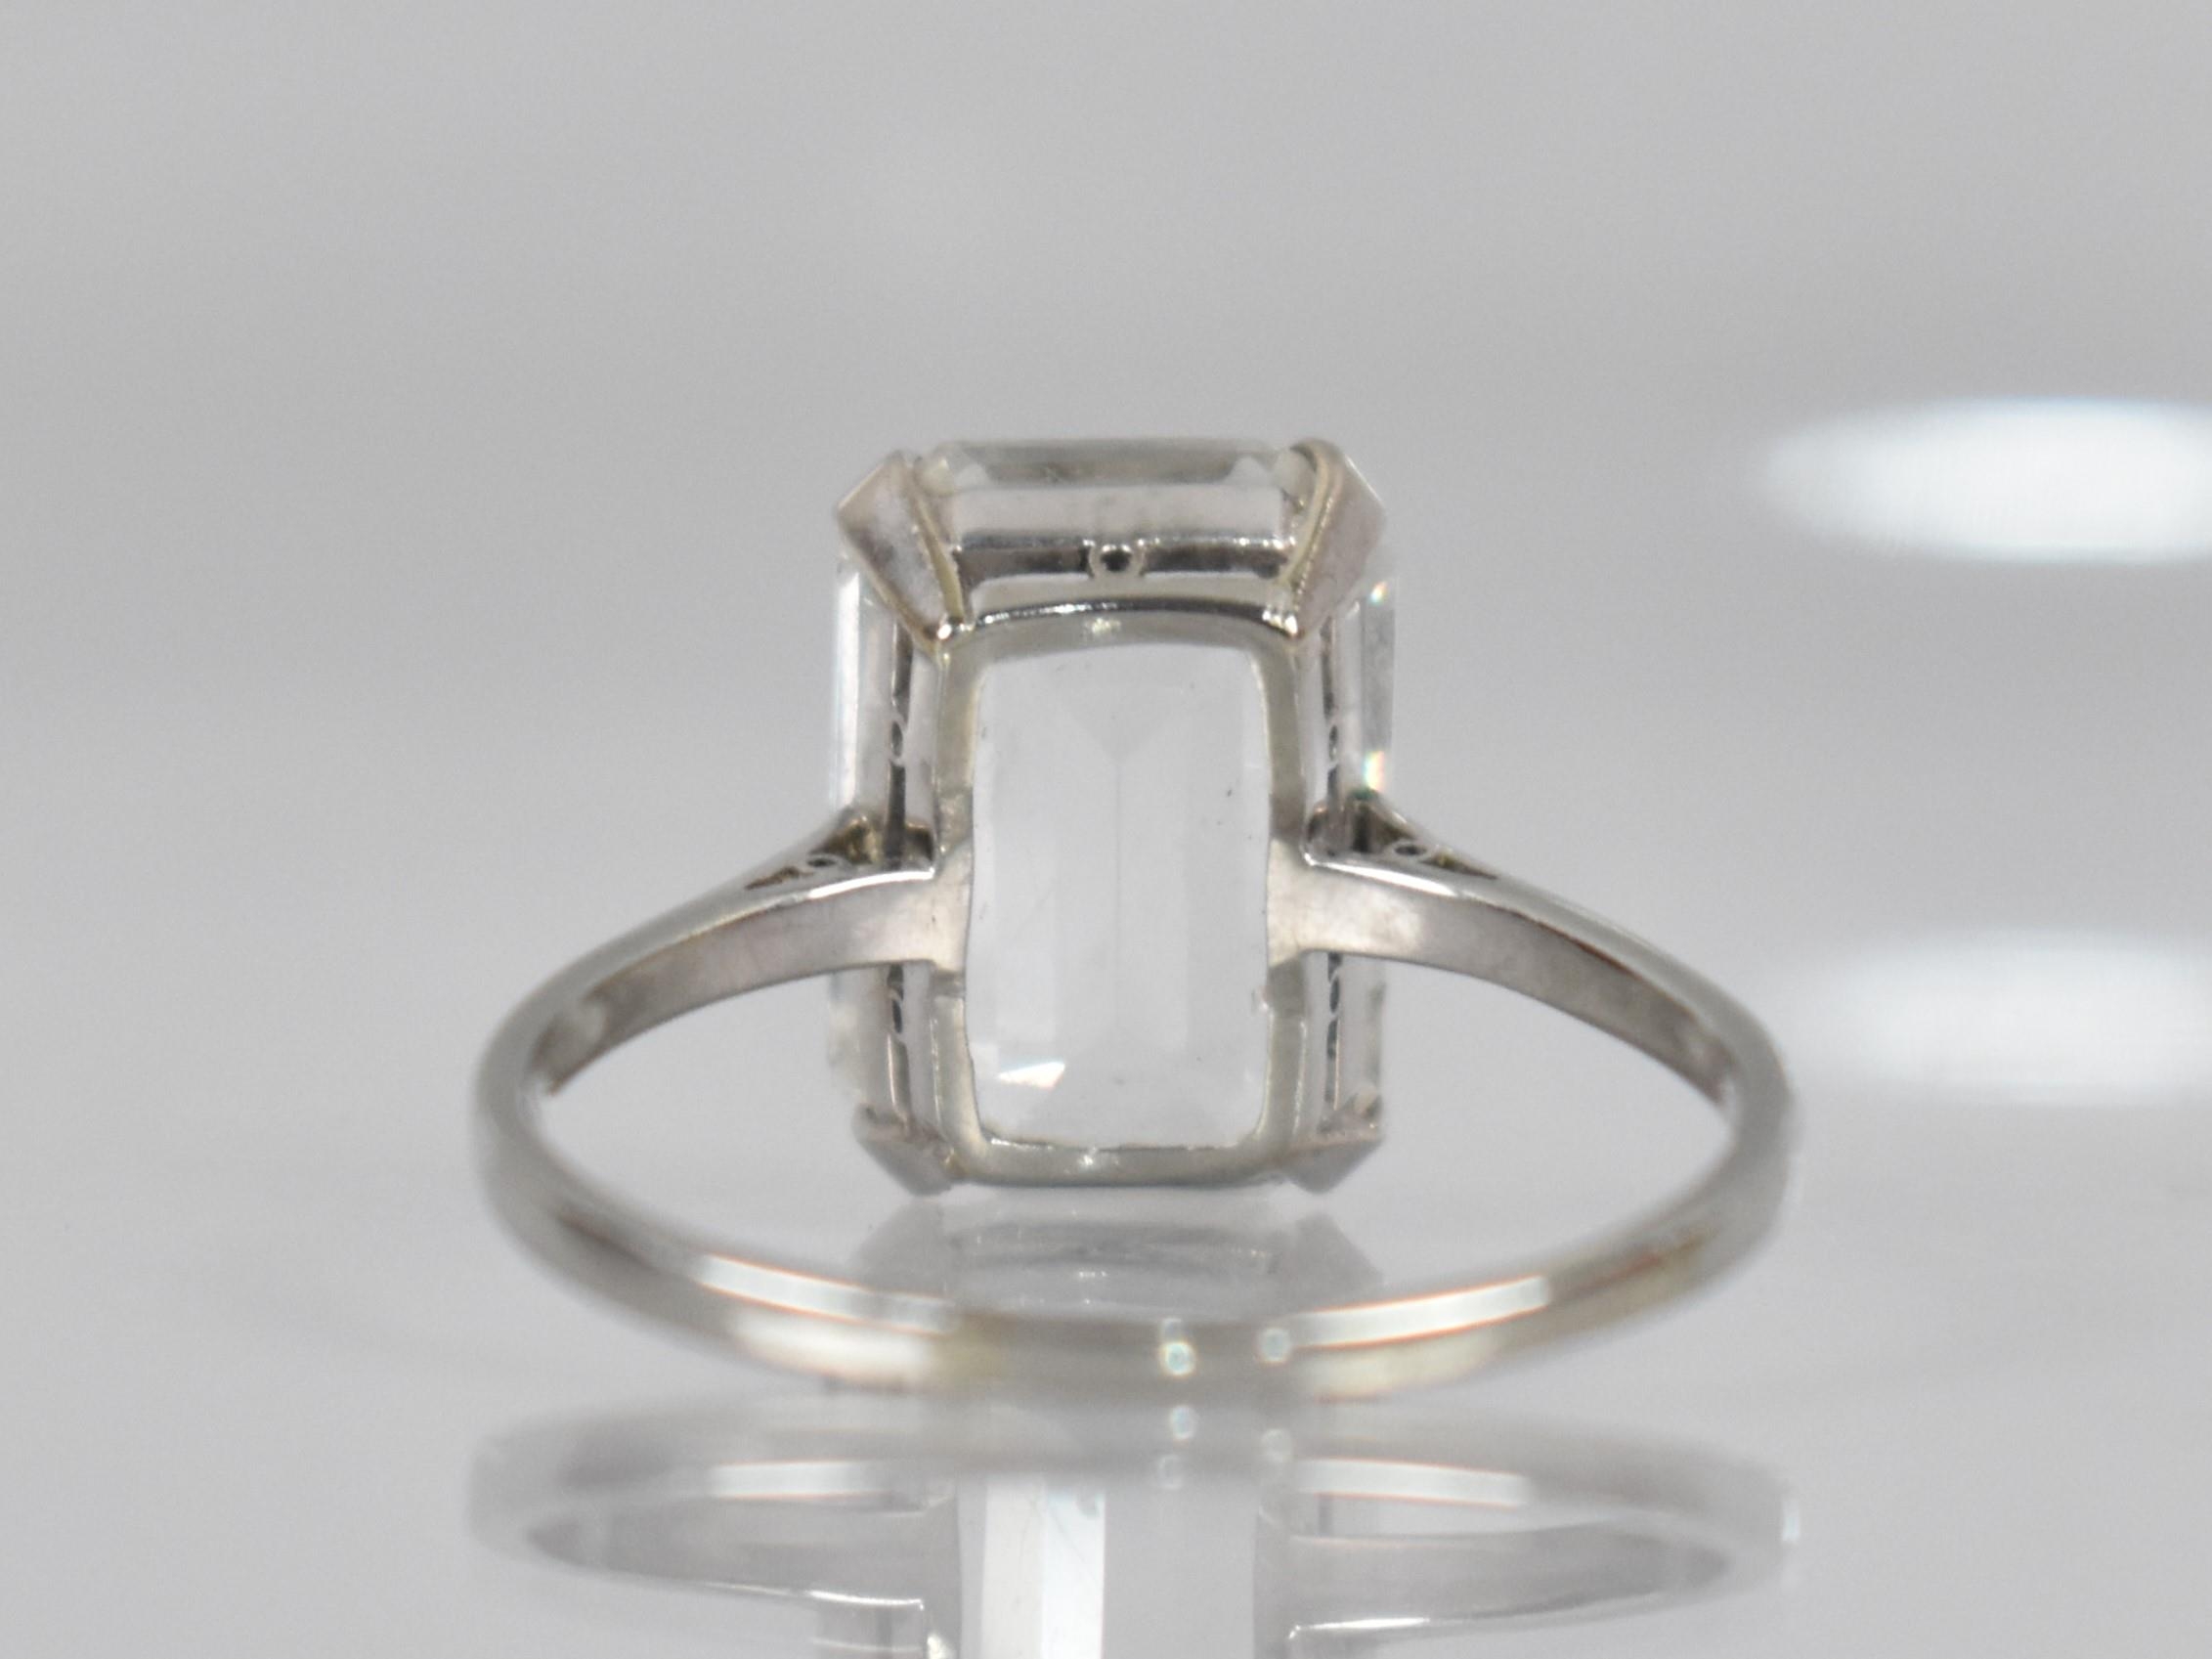 An Art Deco White Sapphire, 18ct Gold and Platinum Ladies Dress Ring, Emerald Cut White Sapphire - Image 3 of 4